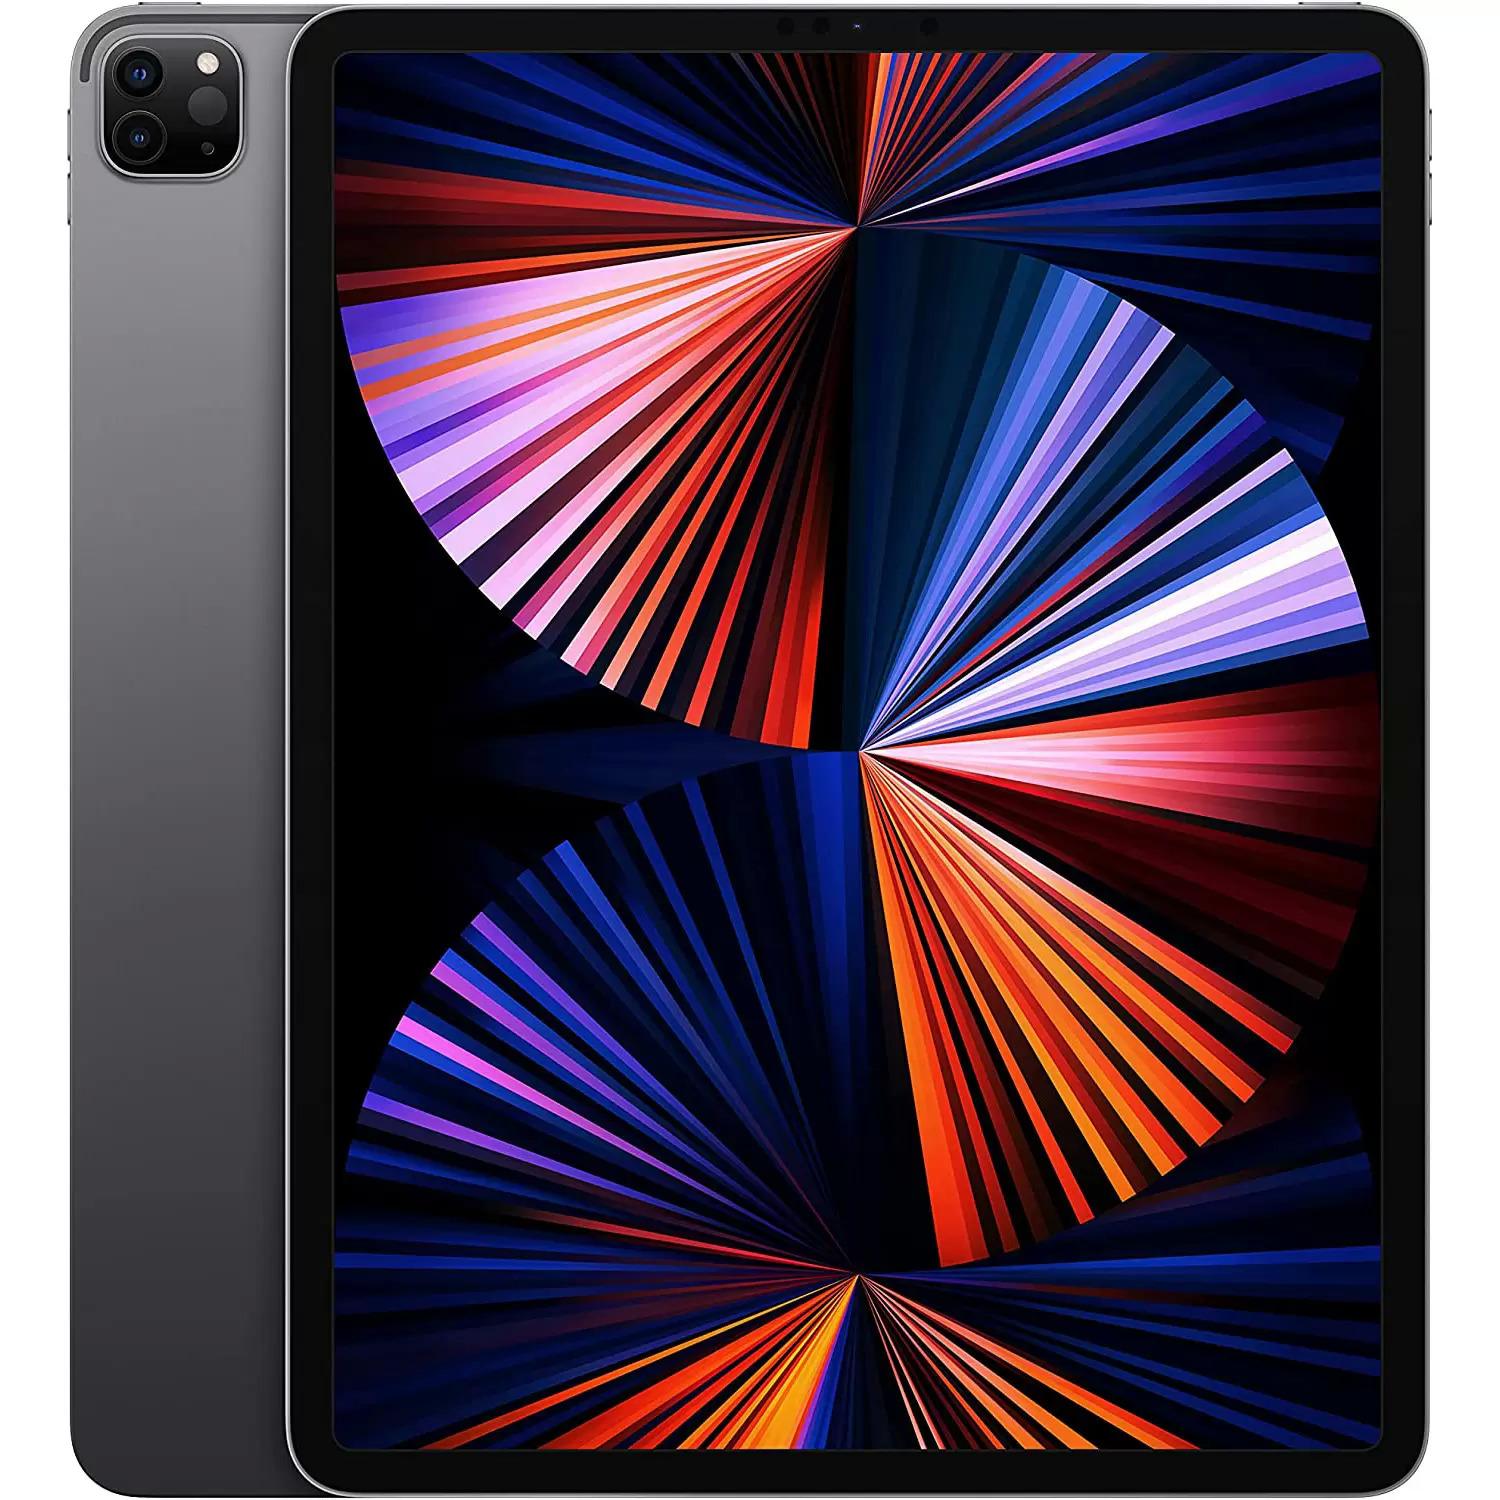 256GB Apple iPad Pro 12.9in Space Gray Wifi Tablet for $999.99 Shipped